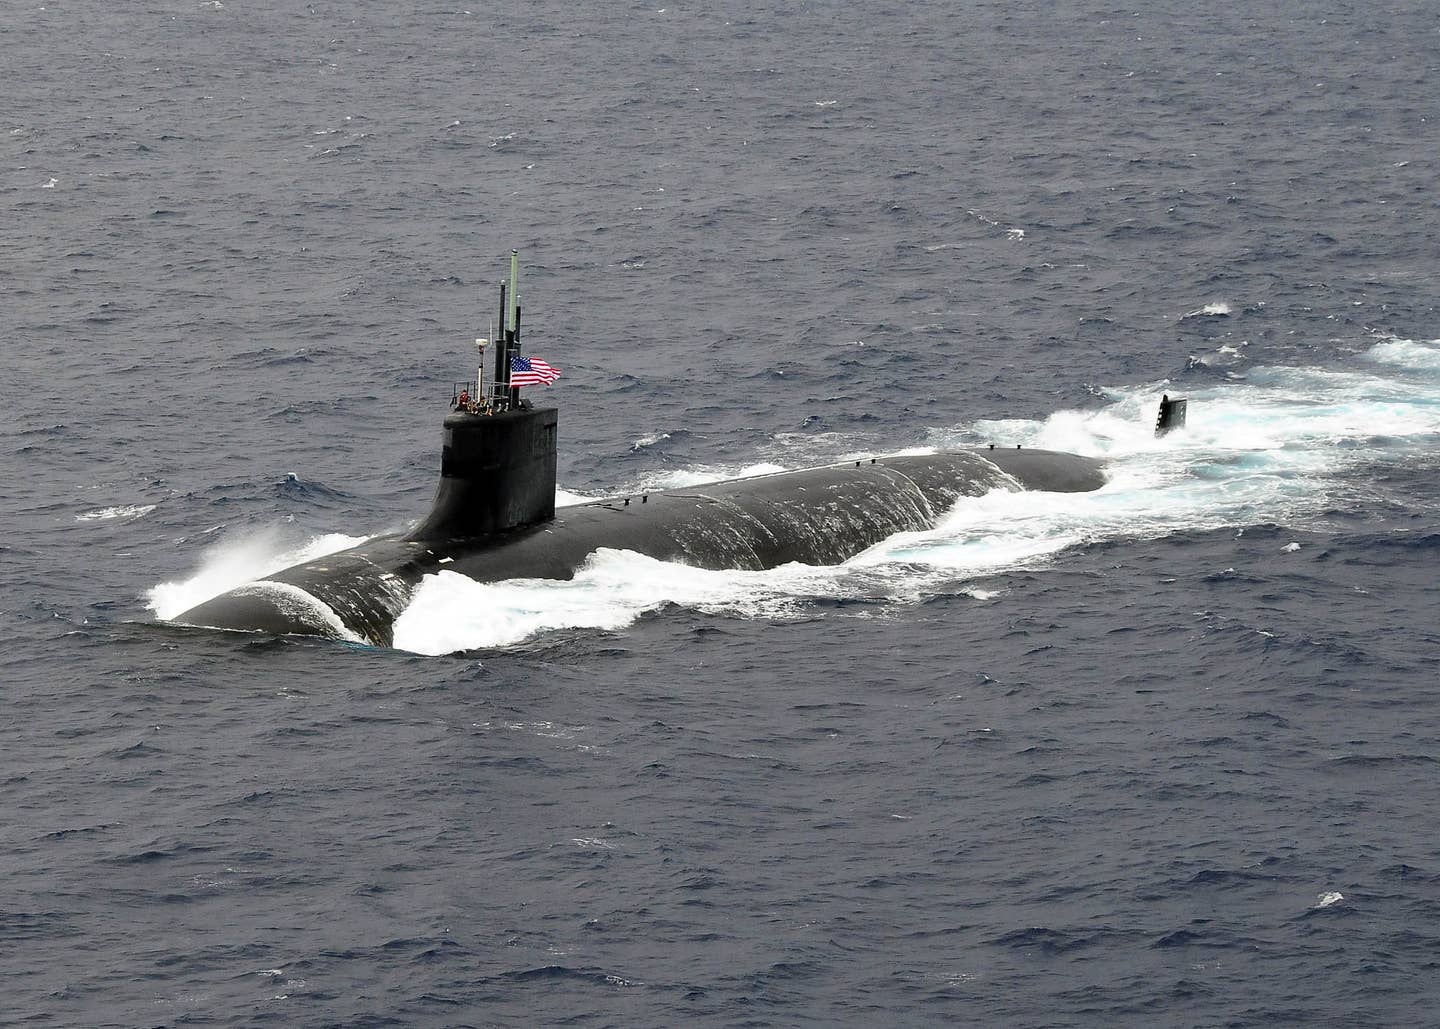 message-editor%2F1639434747360-us_navy_091117-n-1644h-048_the_seawolf-class_attack_submarine_uss_connecticut_ssn_22_is_underway_in_the_pacific_ocean.jpeg